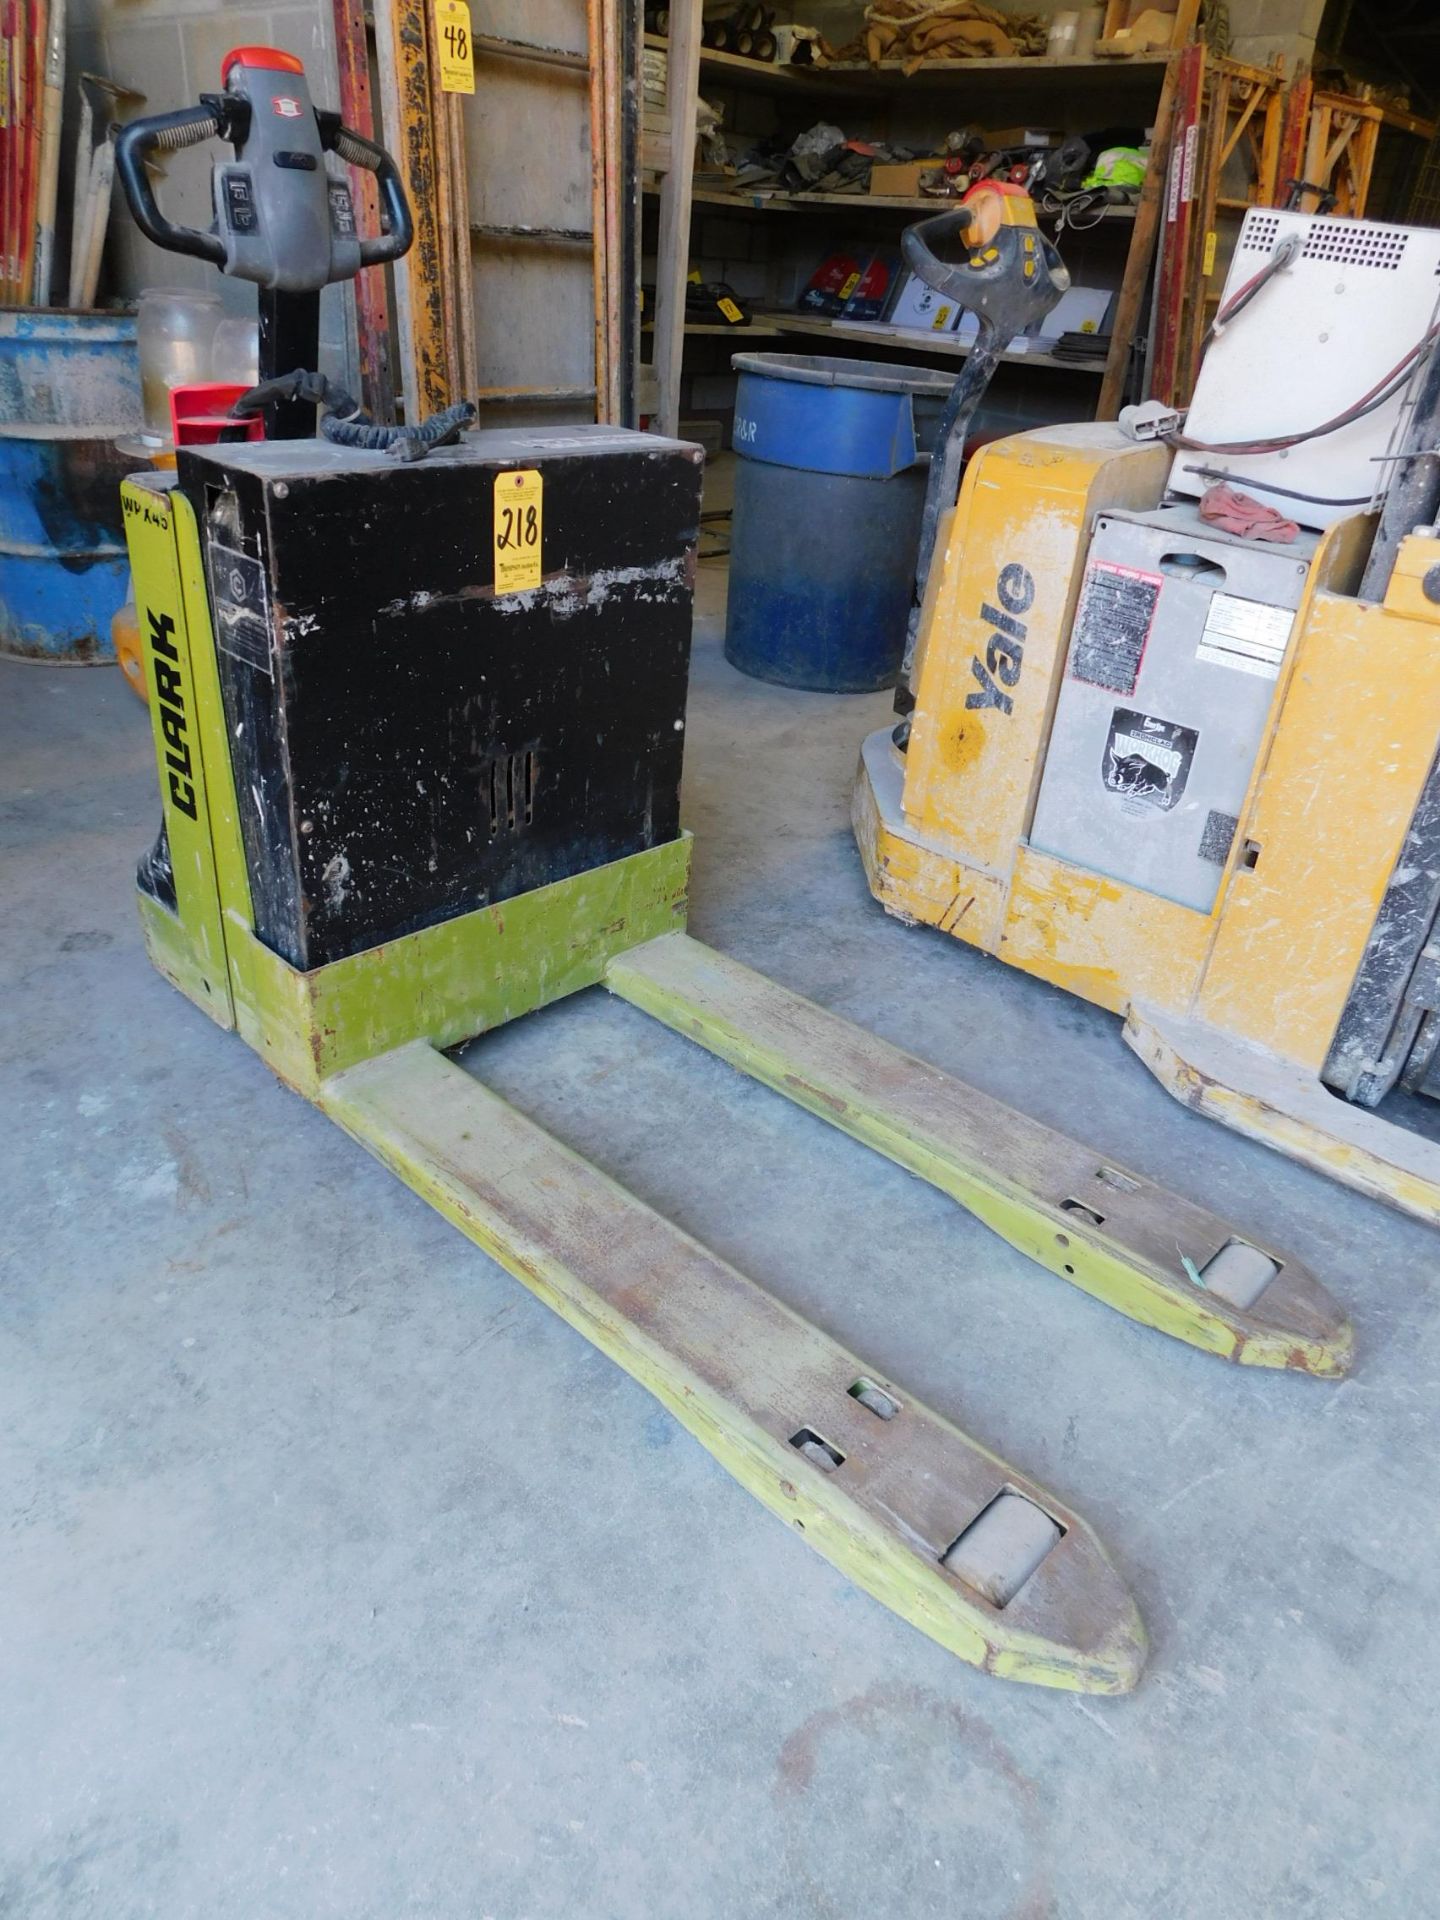 Clark Model WPX45 Electric Pallet Jack, s/n WPX452967-8228CH, 4,500 Lb. Capacity, Built In